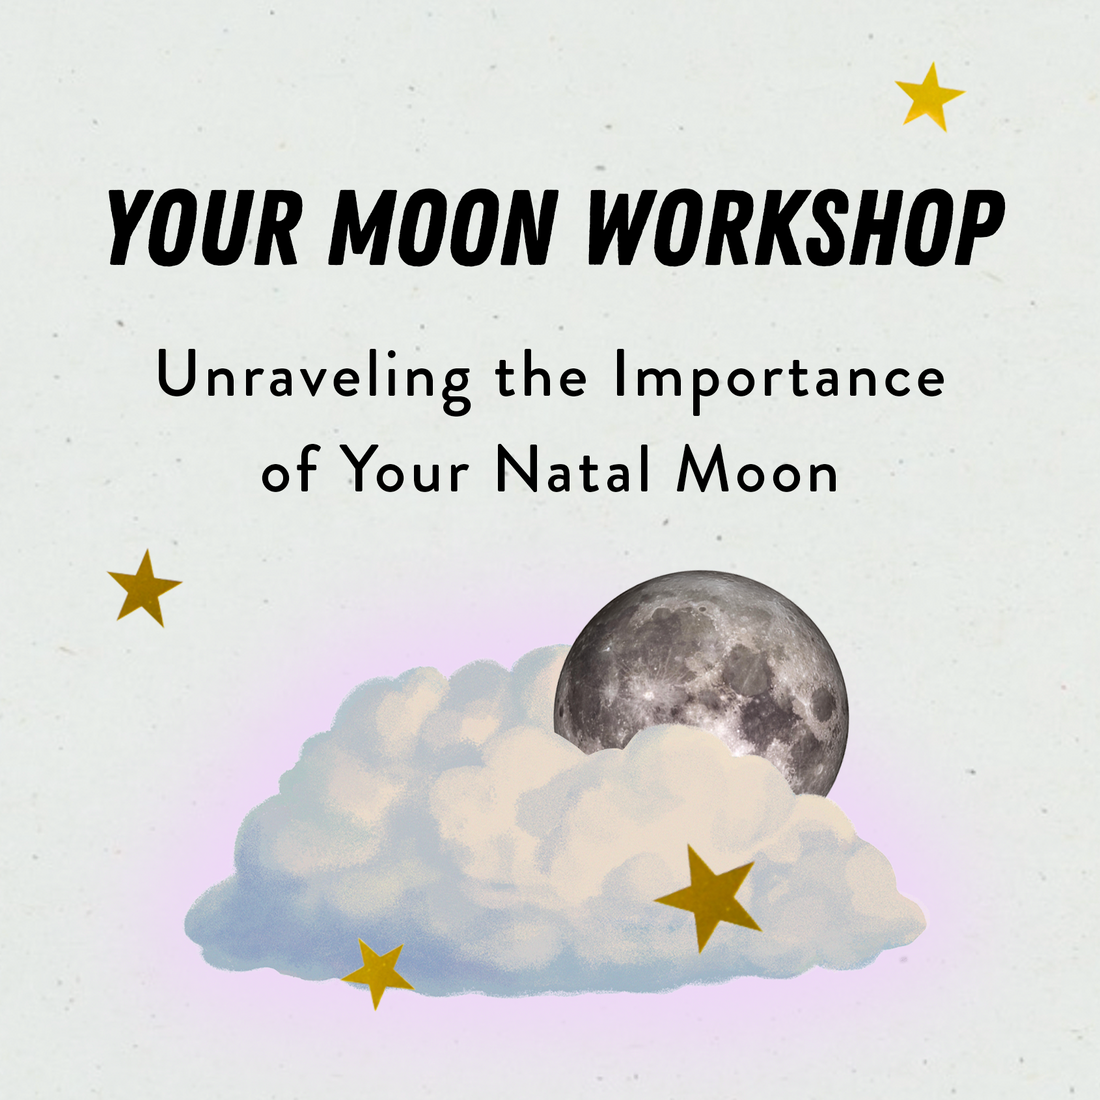 Your Moon Workshop: Unraveling the Importance of Your Natal Moon